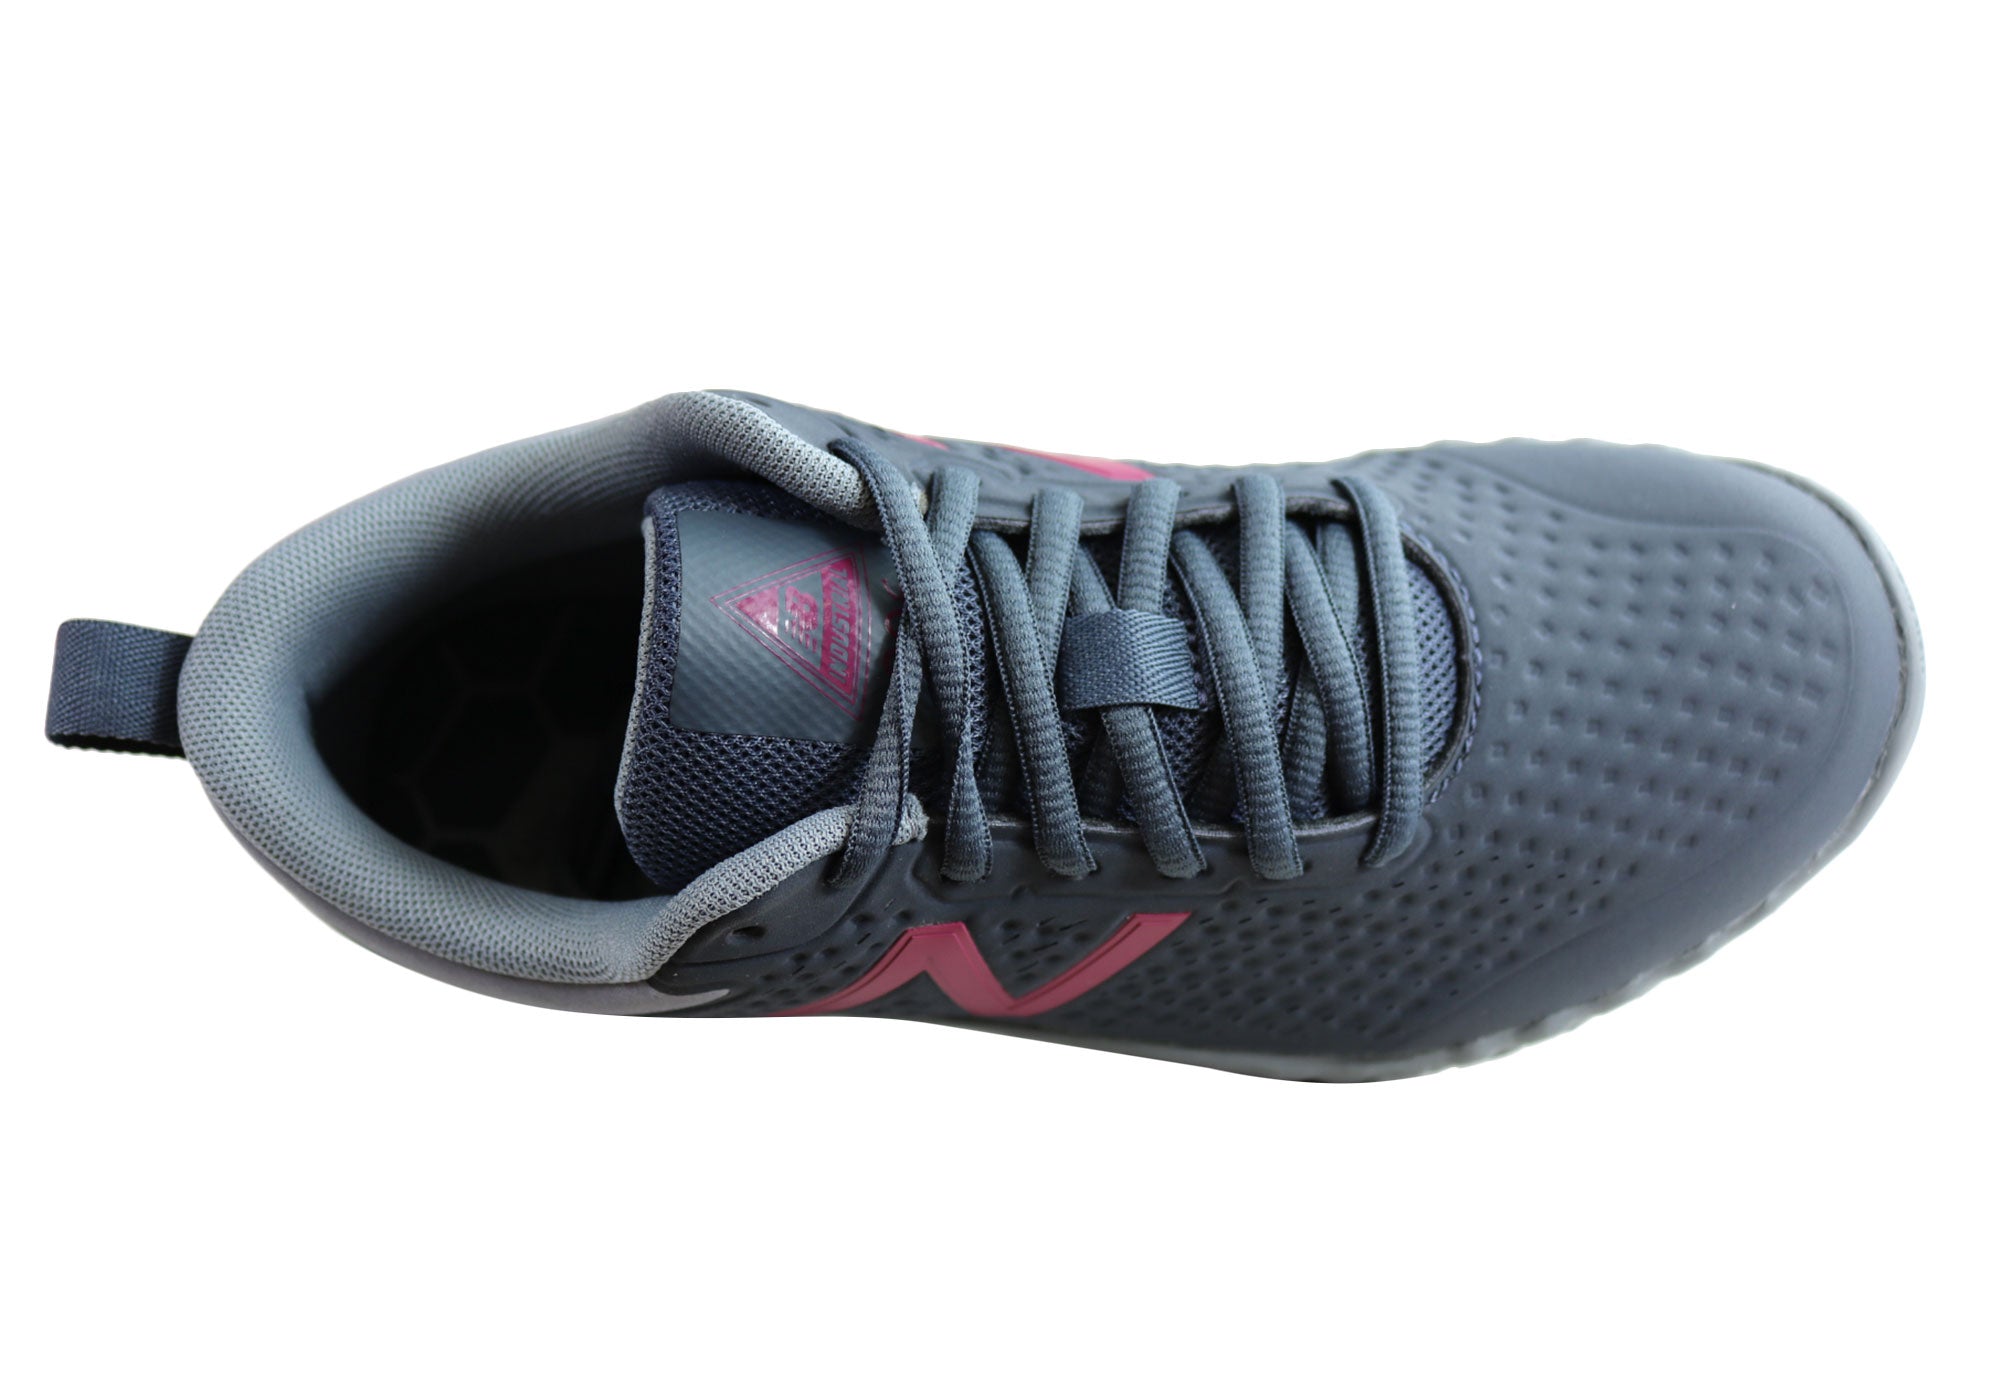 New Balance Womens 806 Wide Fit Slip Resistant Work Shoes | Brand House ...